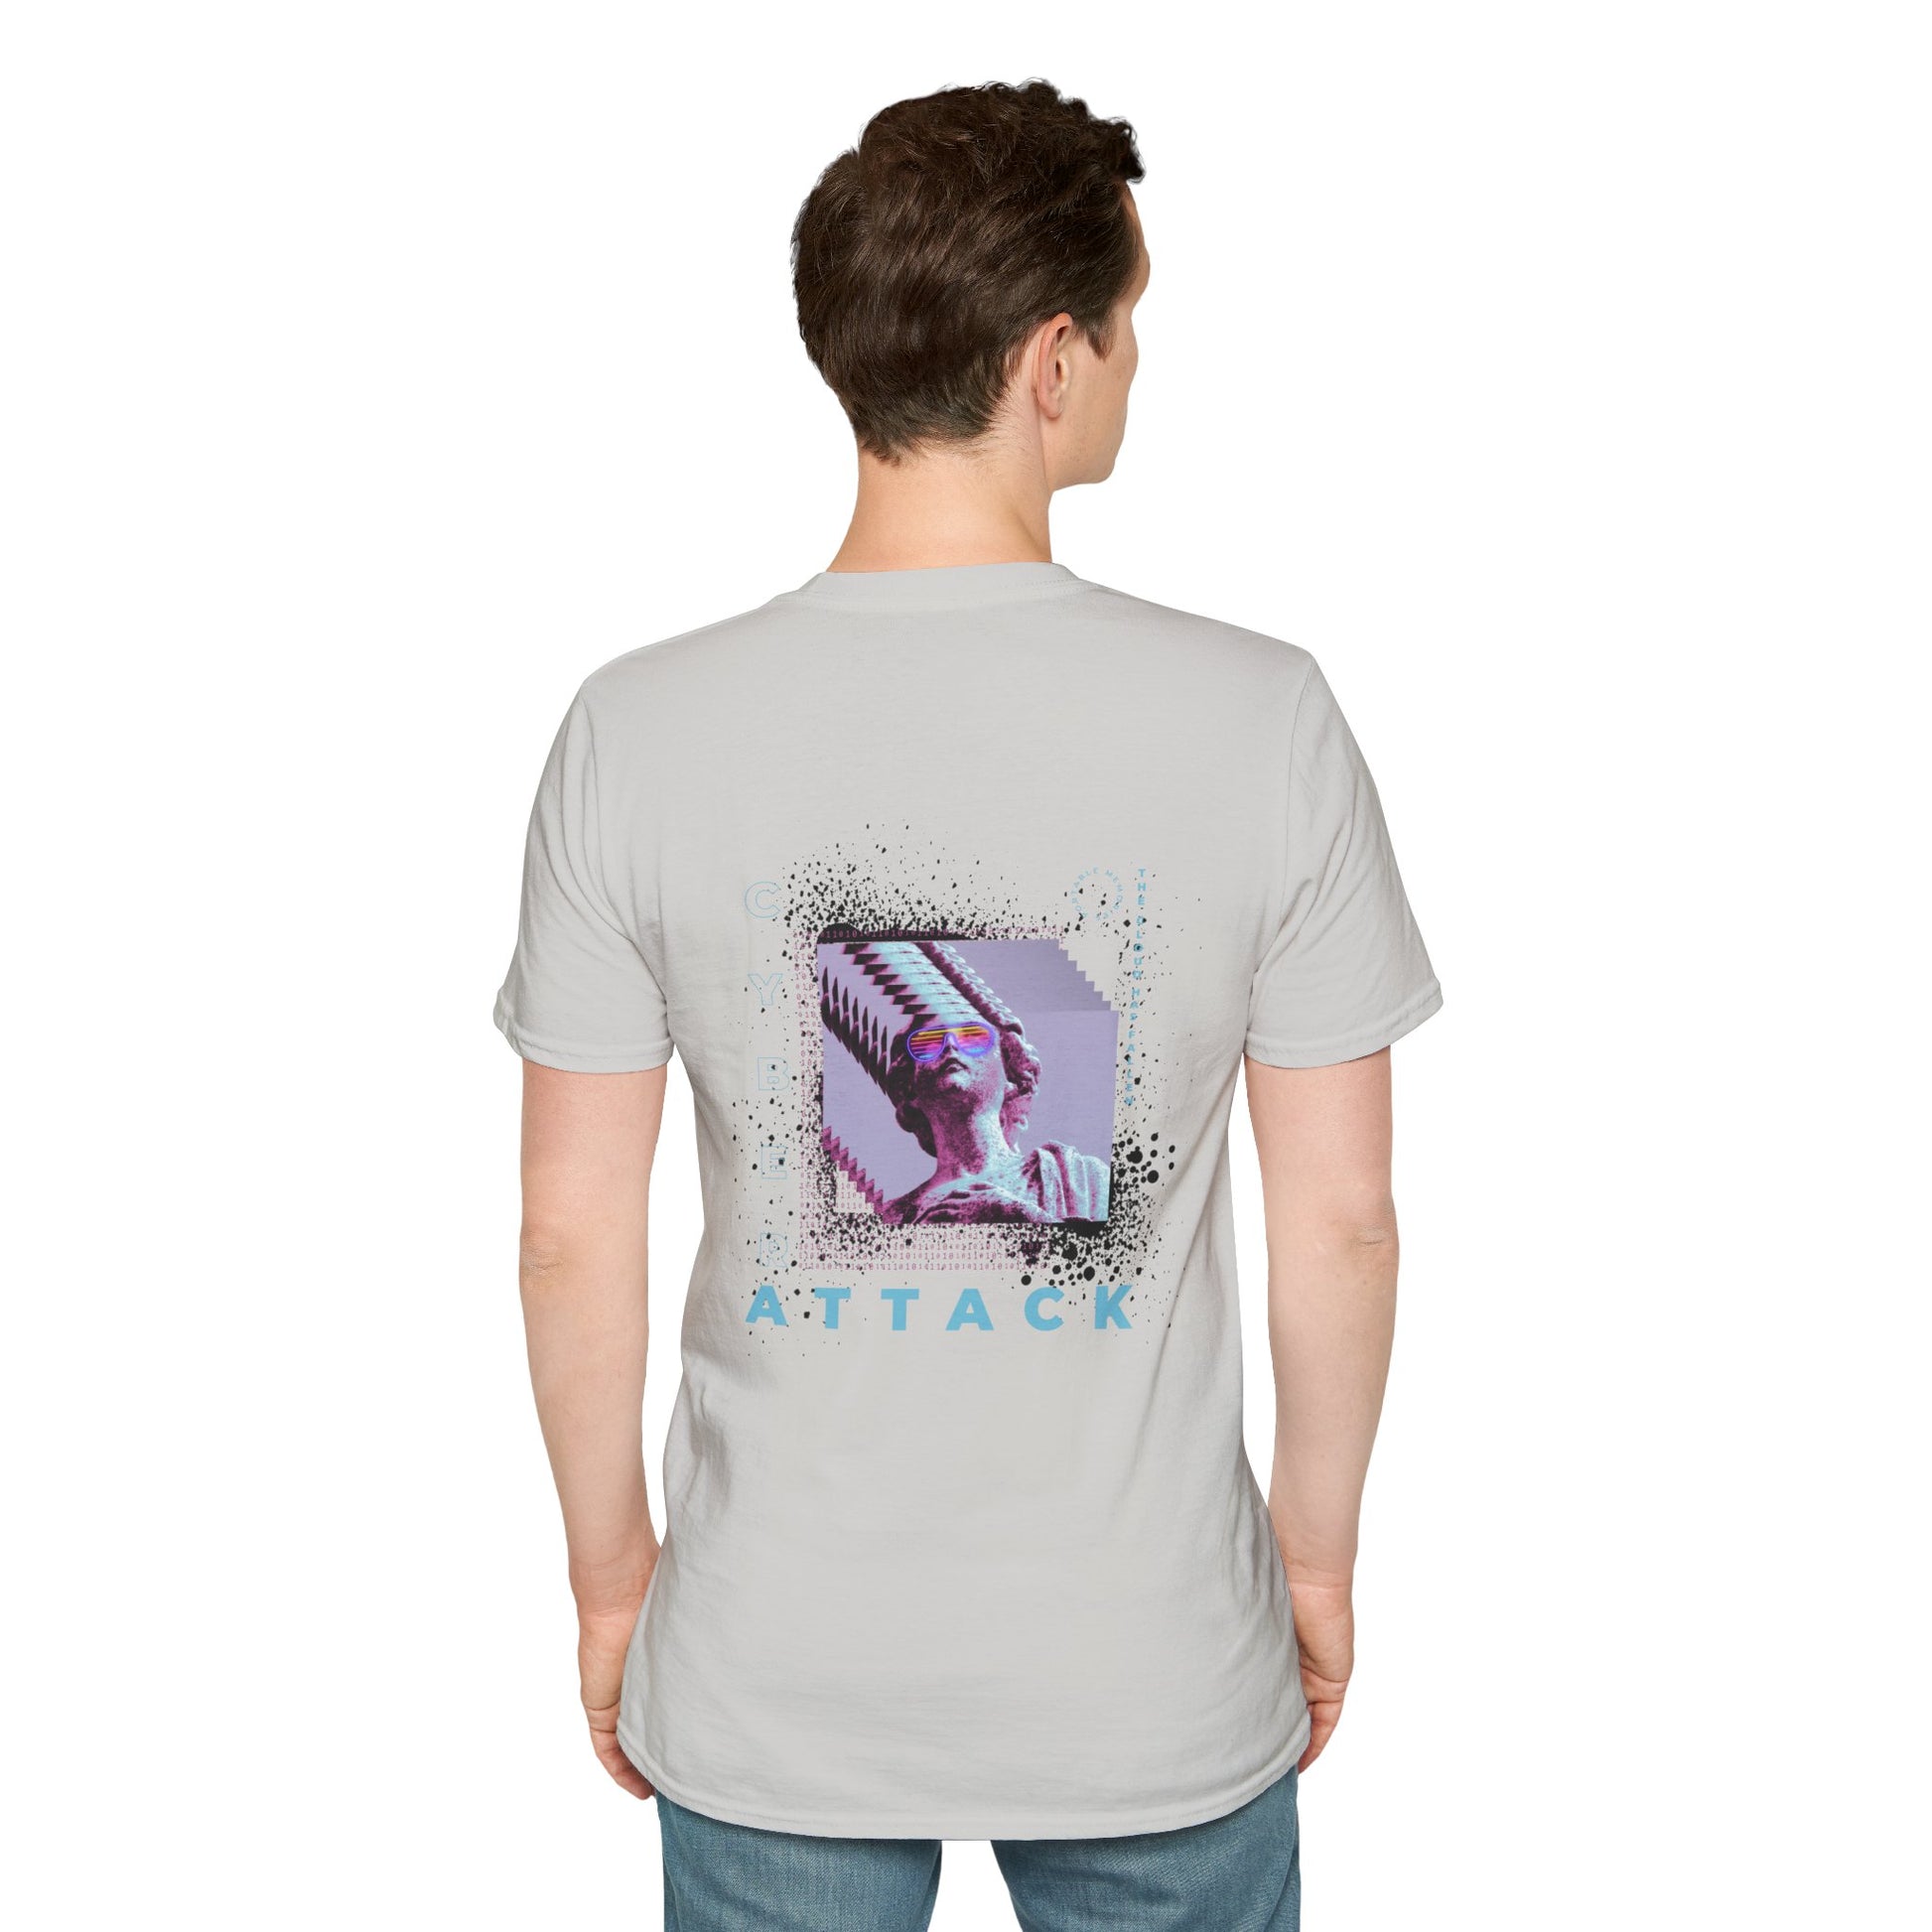 Light Grey T-shirt with a pixelated Statue of Liberty and modern glitch art design